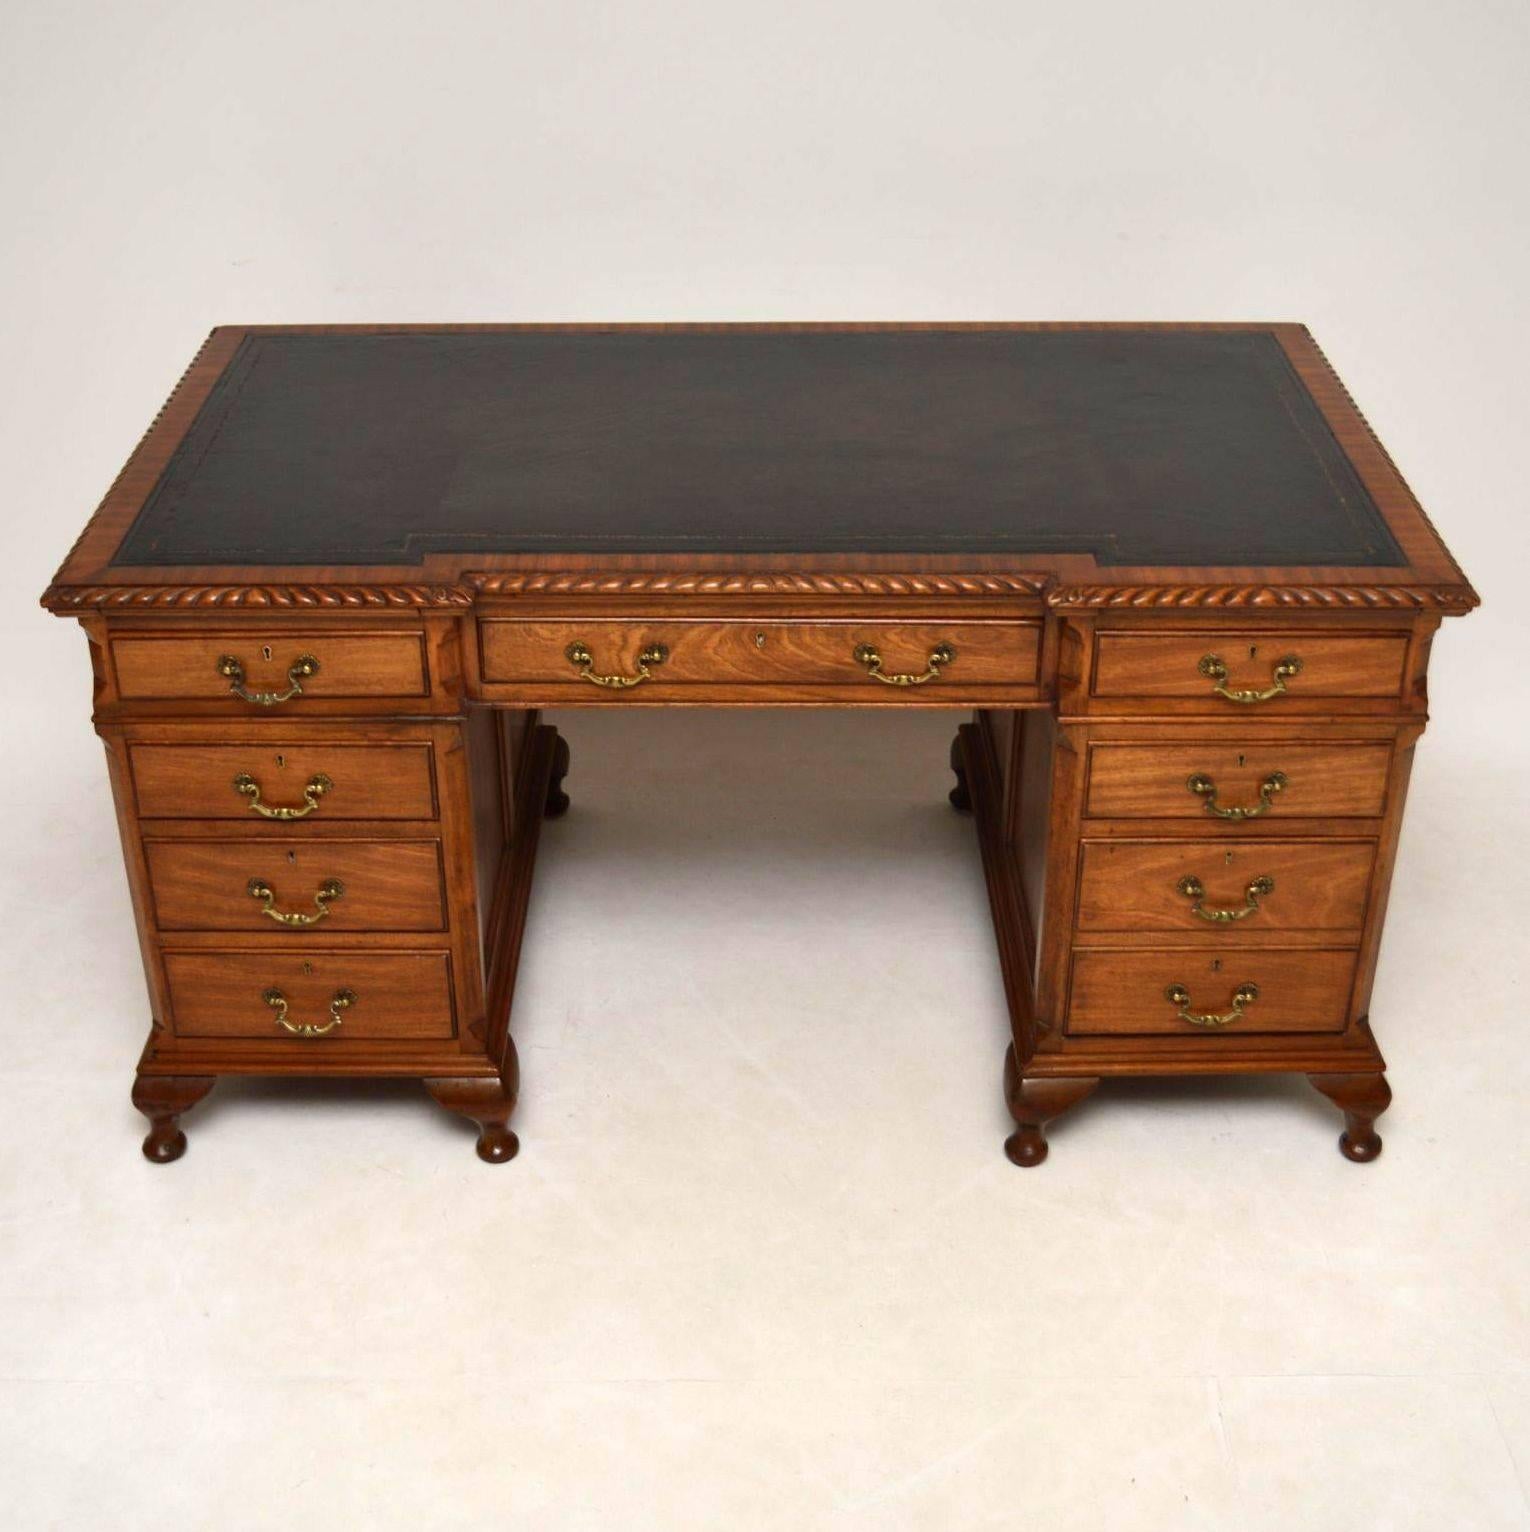 Large impressive antique mahogany pedestal desk with an inverted breakfront in good condition and dating from circa 1900-1910 period. It has a hand colored tooled leather writing surface, a gadrooned top edge, two slide out surfaces either side just